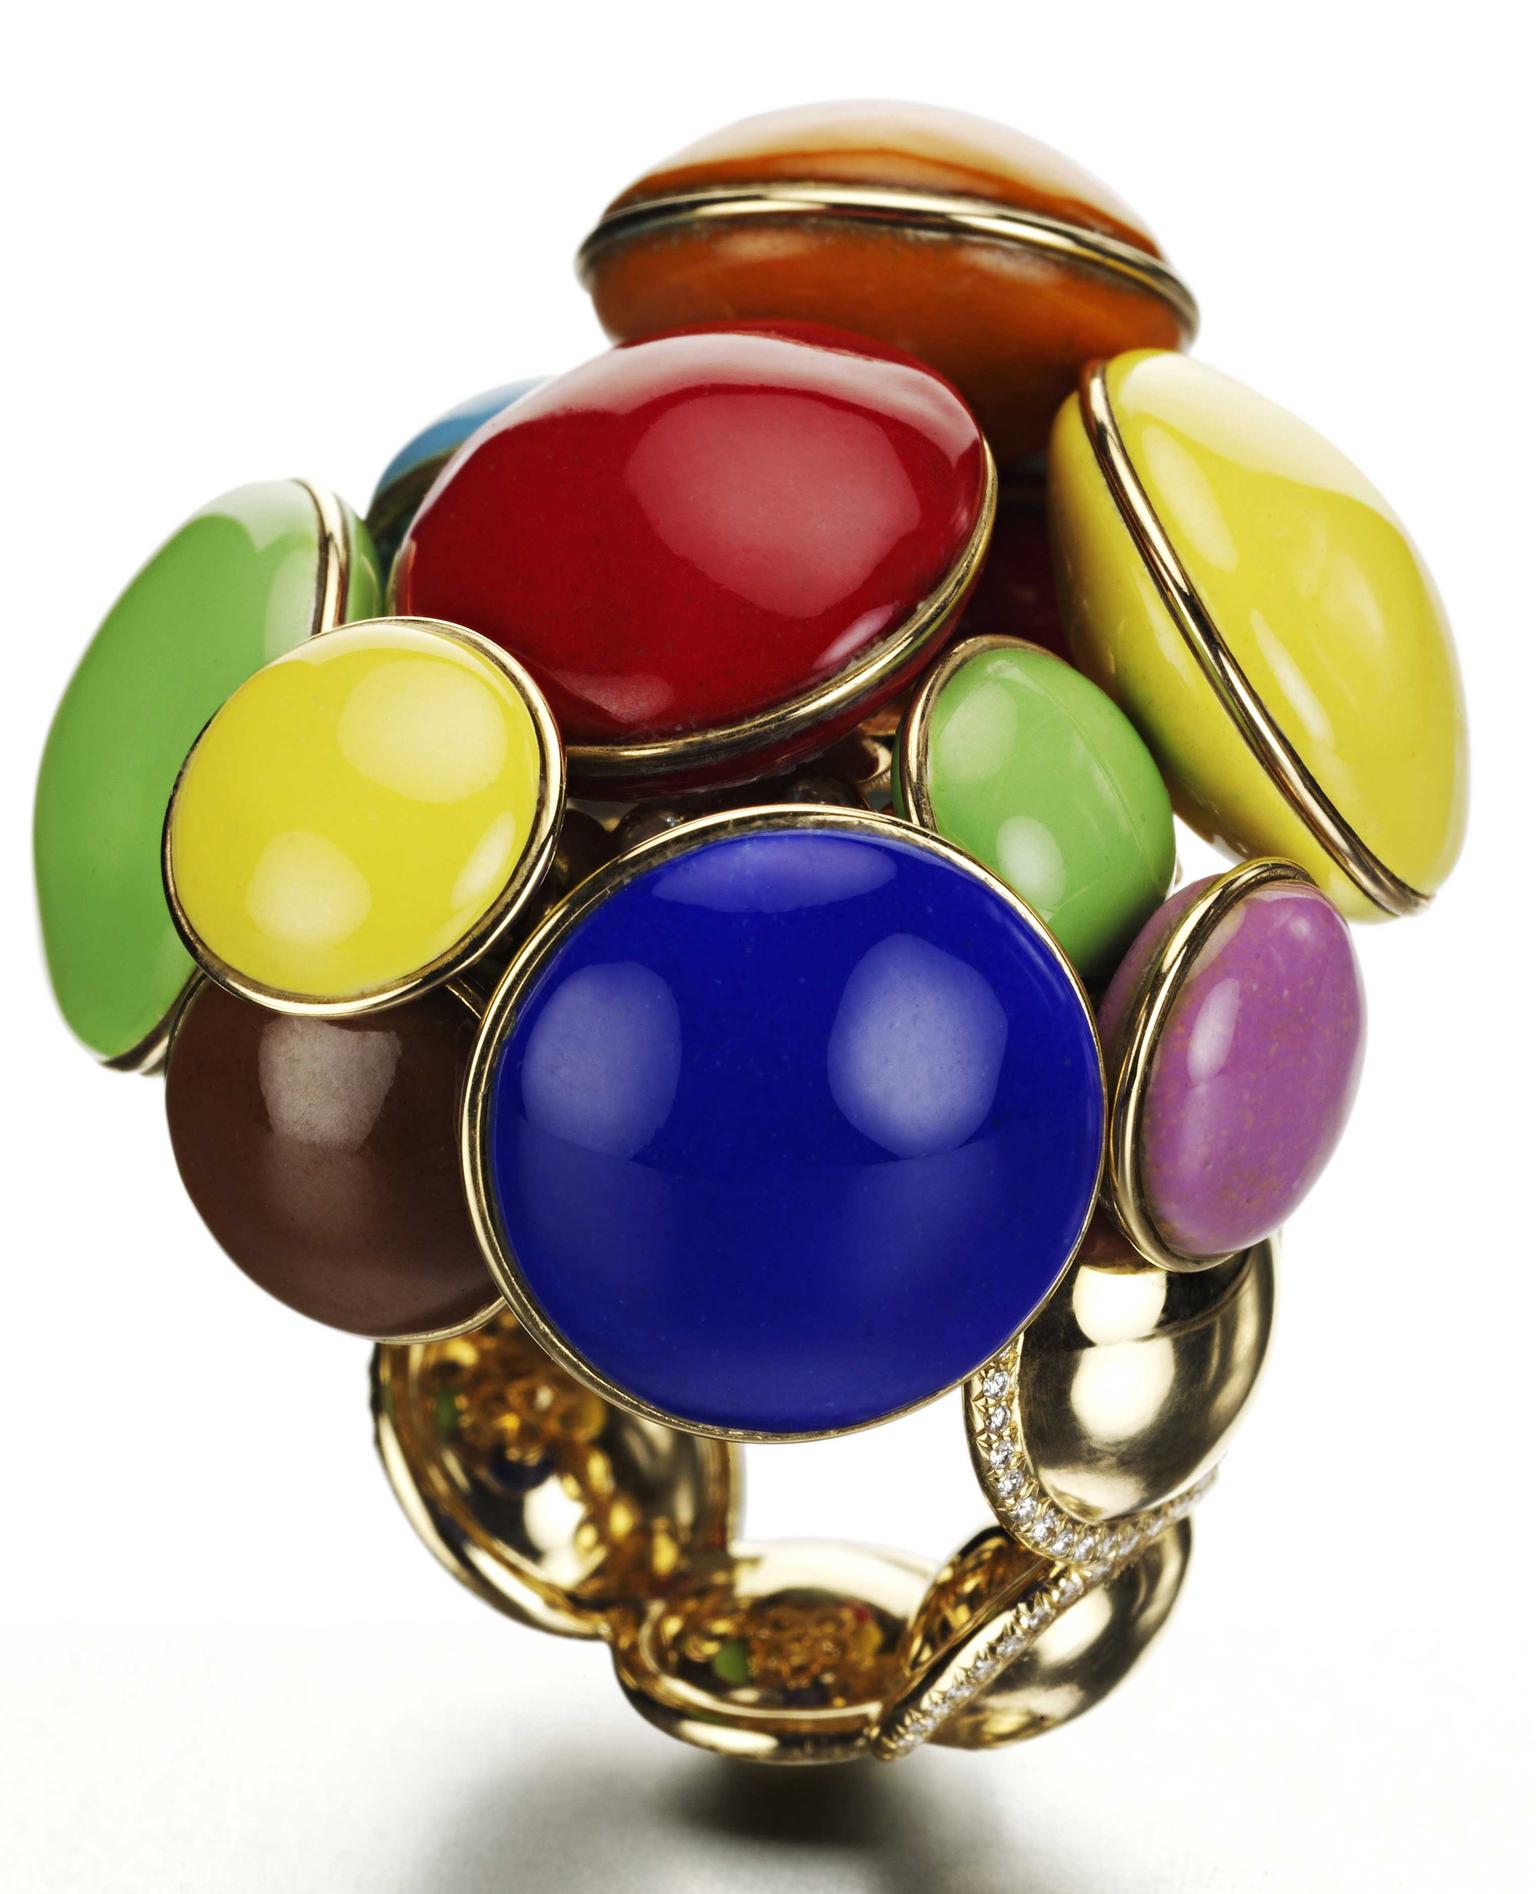 MPL-2013.-Suzanne-Syz-Sarl.-Smarties-Rings..jpg